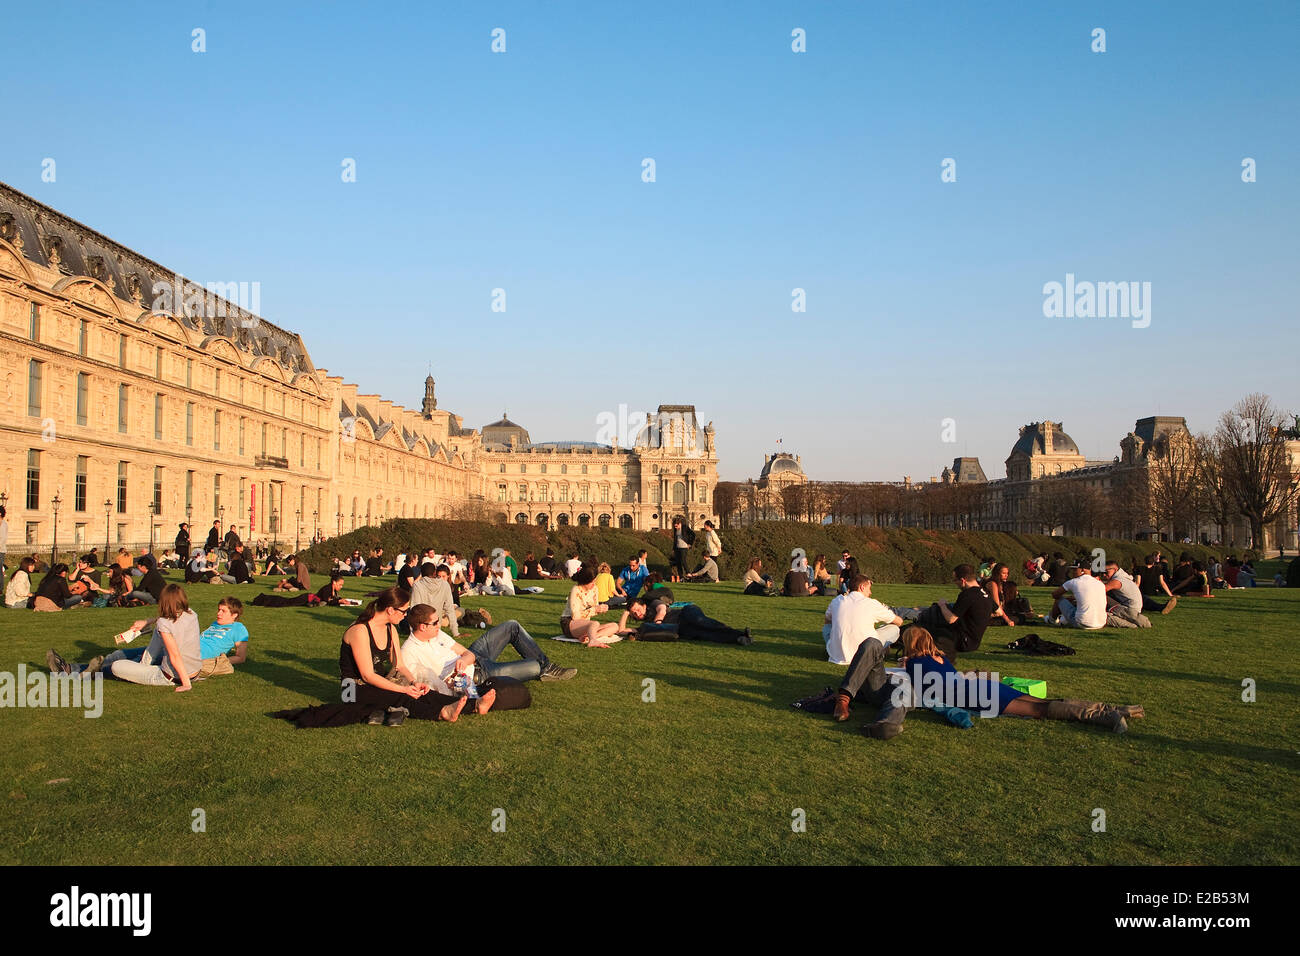 France, Paris, people sunbathing in the Jardins du Carrousel and the Louvre museum in the background Stock Photo